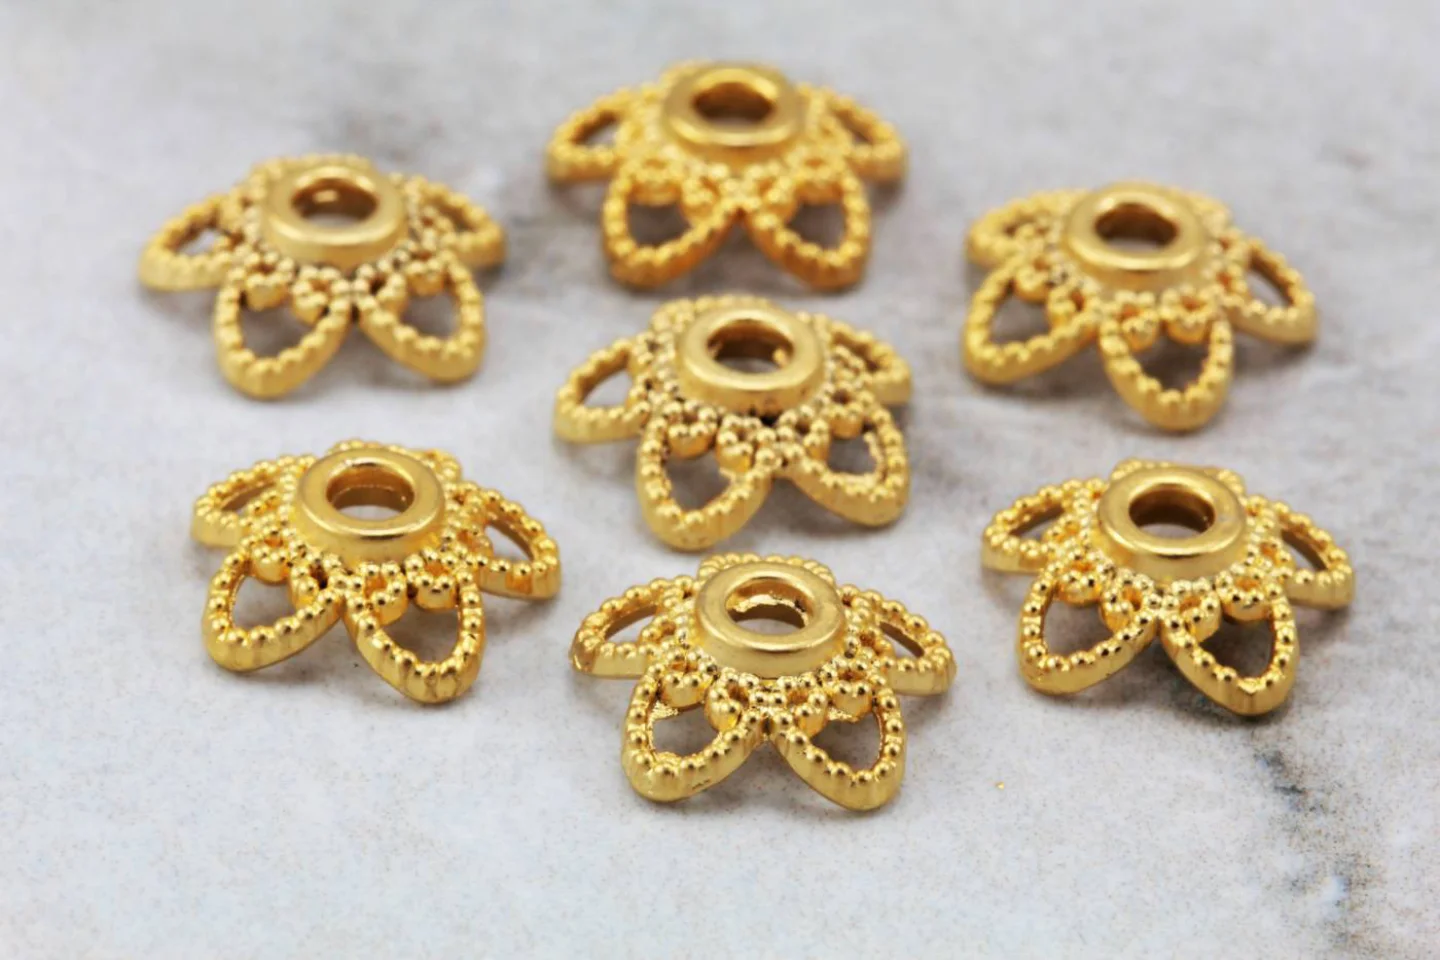 gold-plated-metal-star-shape-bead-caps.